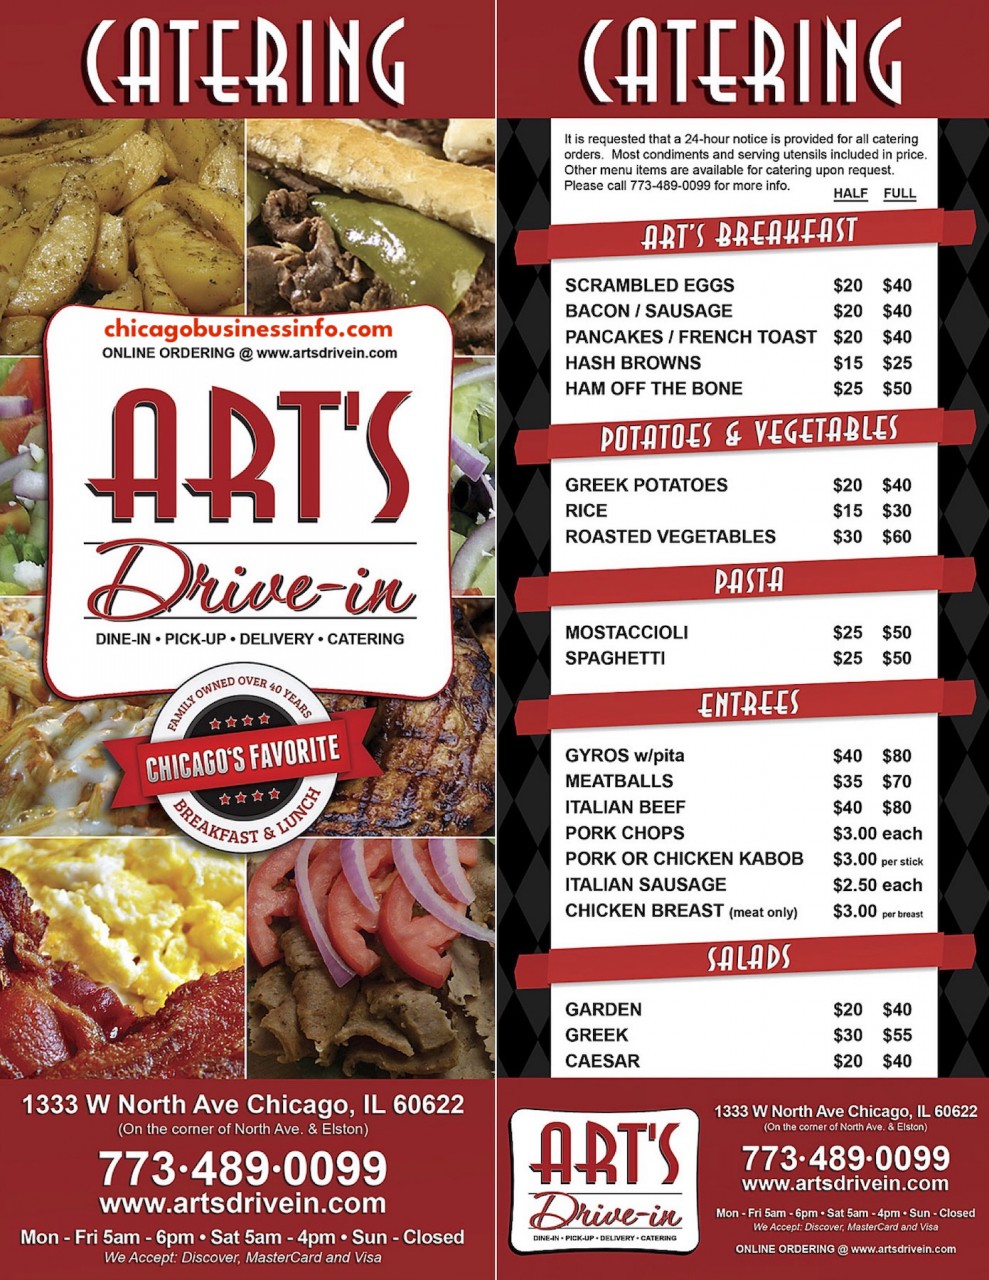 Arts Drive In Chicago Catering Menu